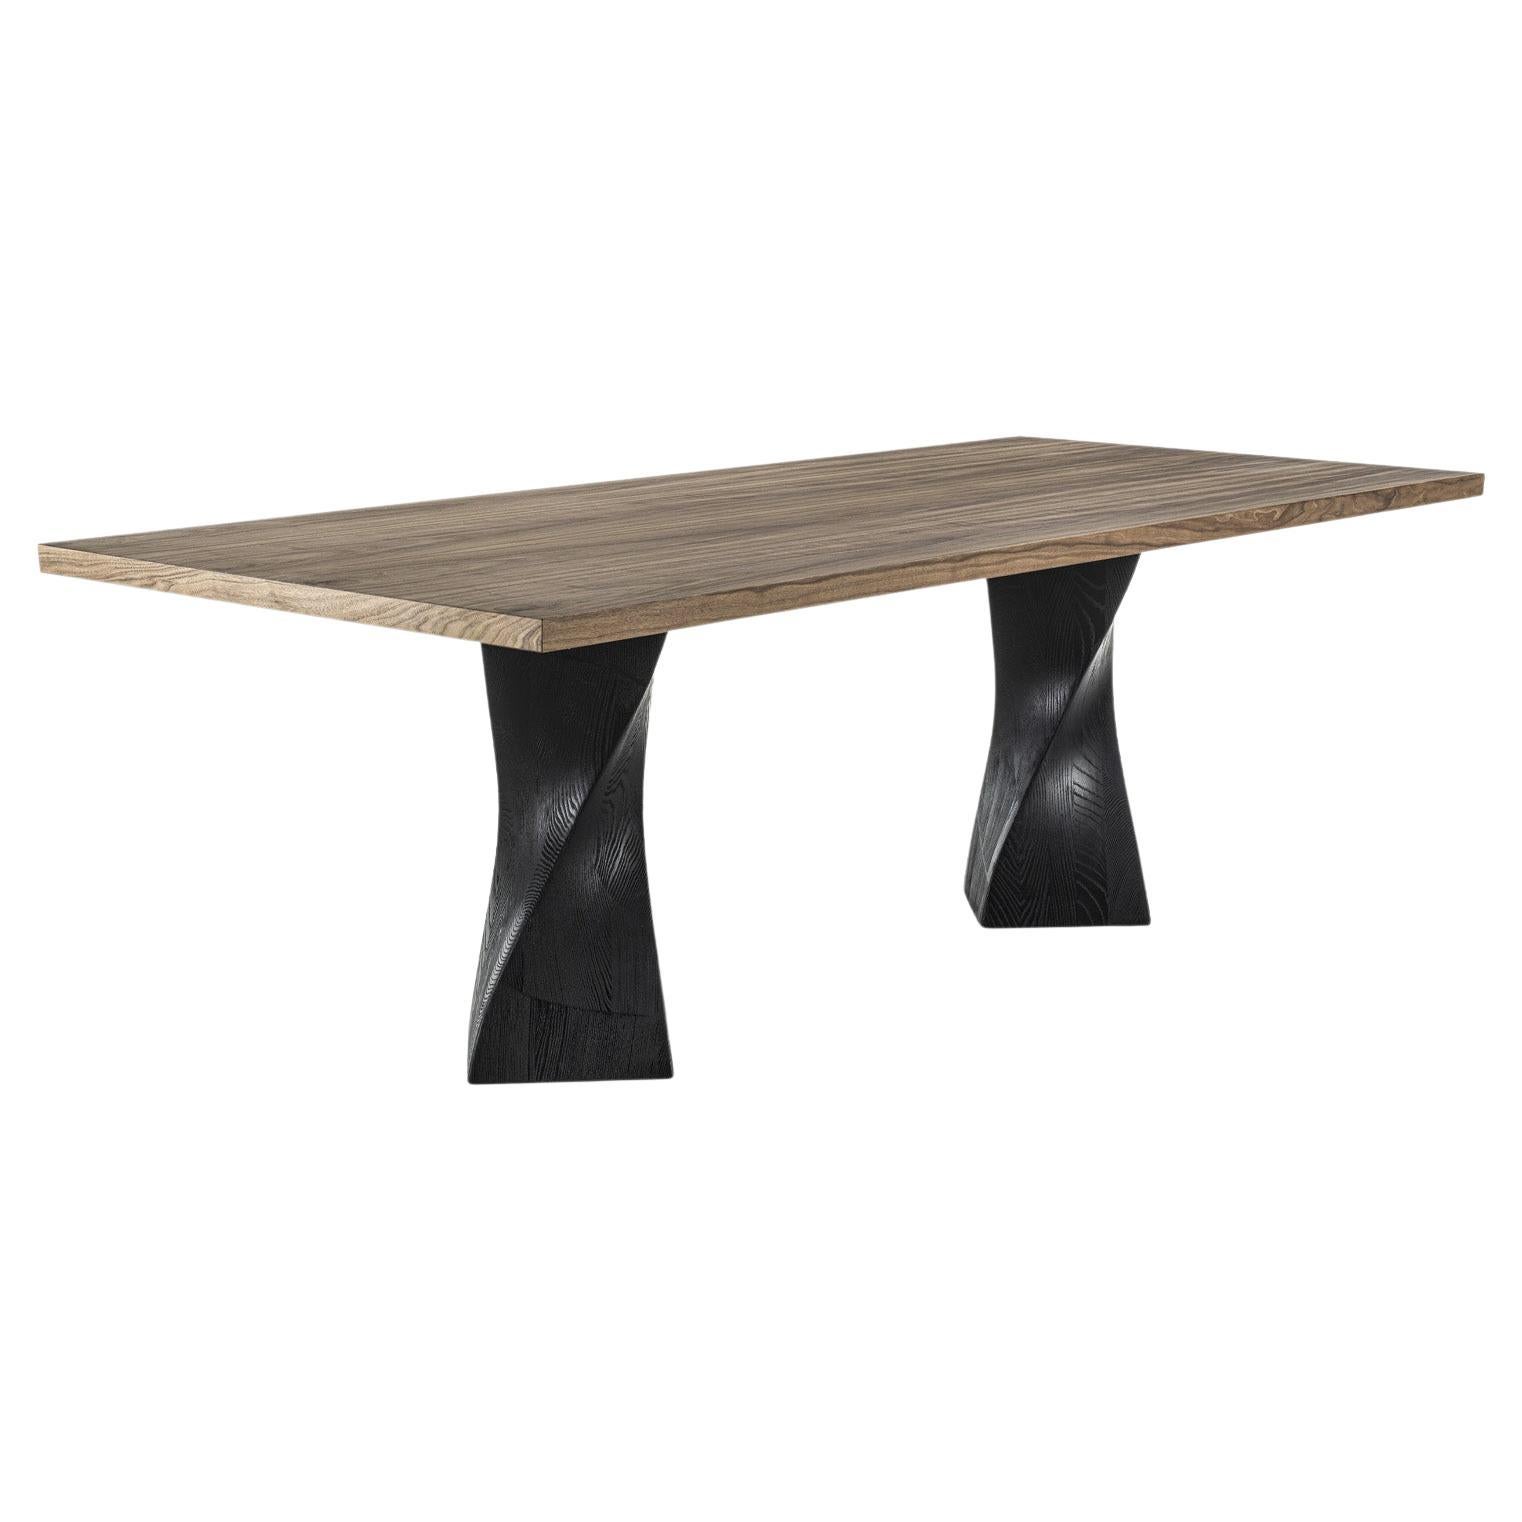 Simple Twist Wood Table, Designed by Studio Excalibur, Made in Italy For Sale